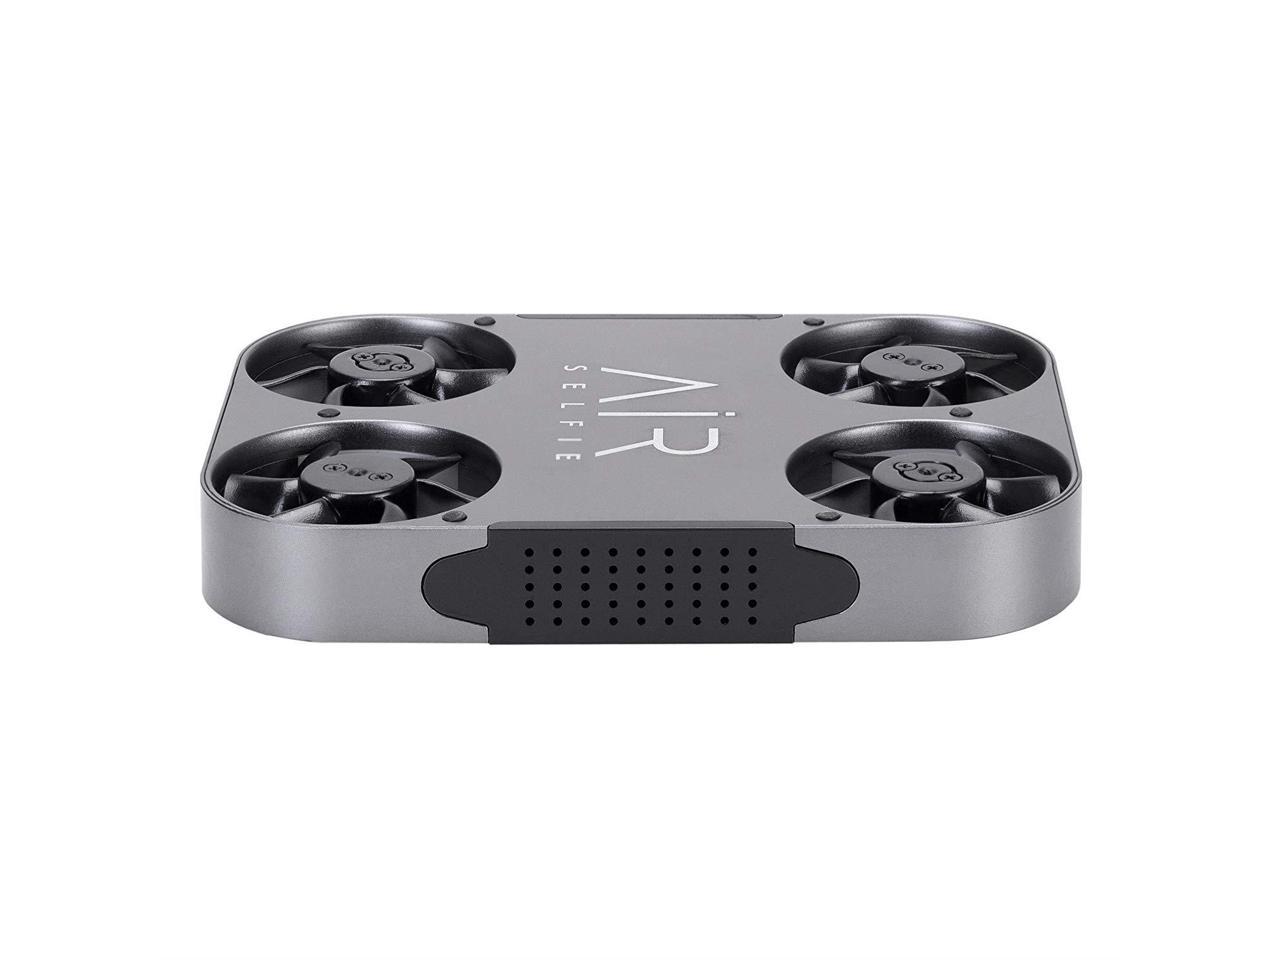 AirSelfie2 Pocket Size Selfie Flying Camera Capture HD Video & Still Photos Via iOS and Android App AirSelfie AS2 